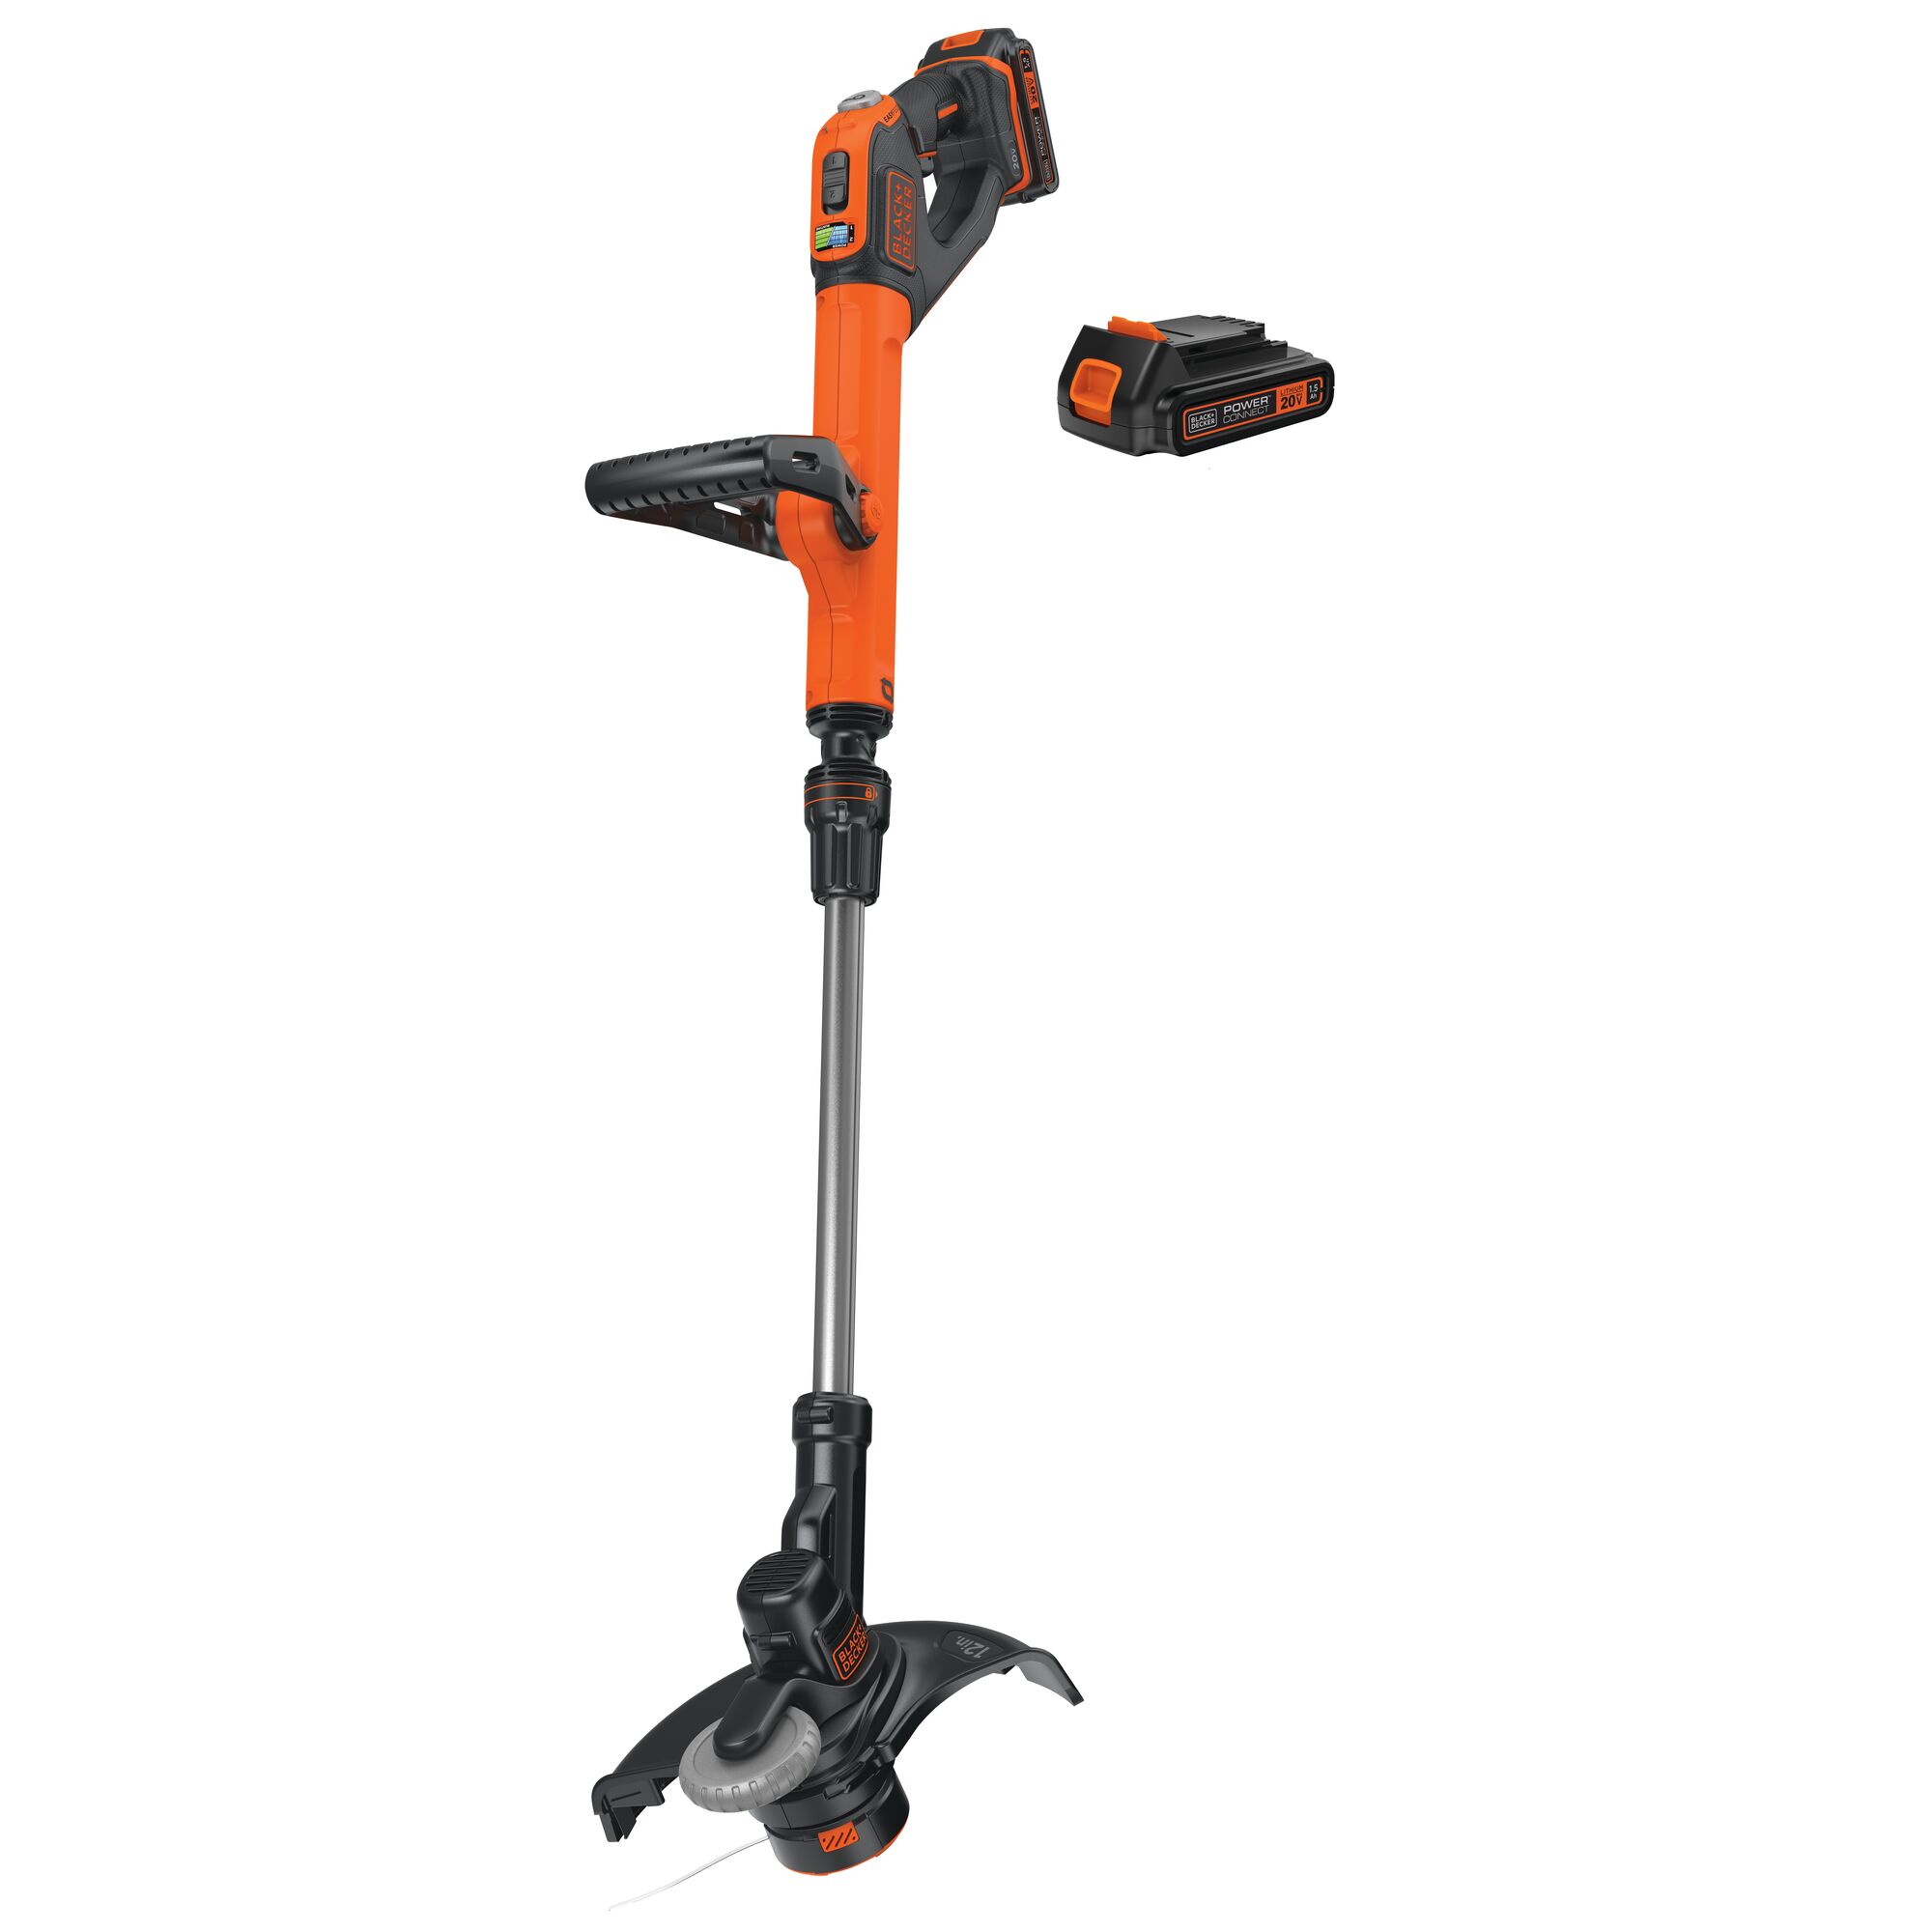 20V Max Lithium Easyfeed string Trimmer/Edger and battery on white background.